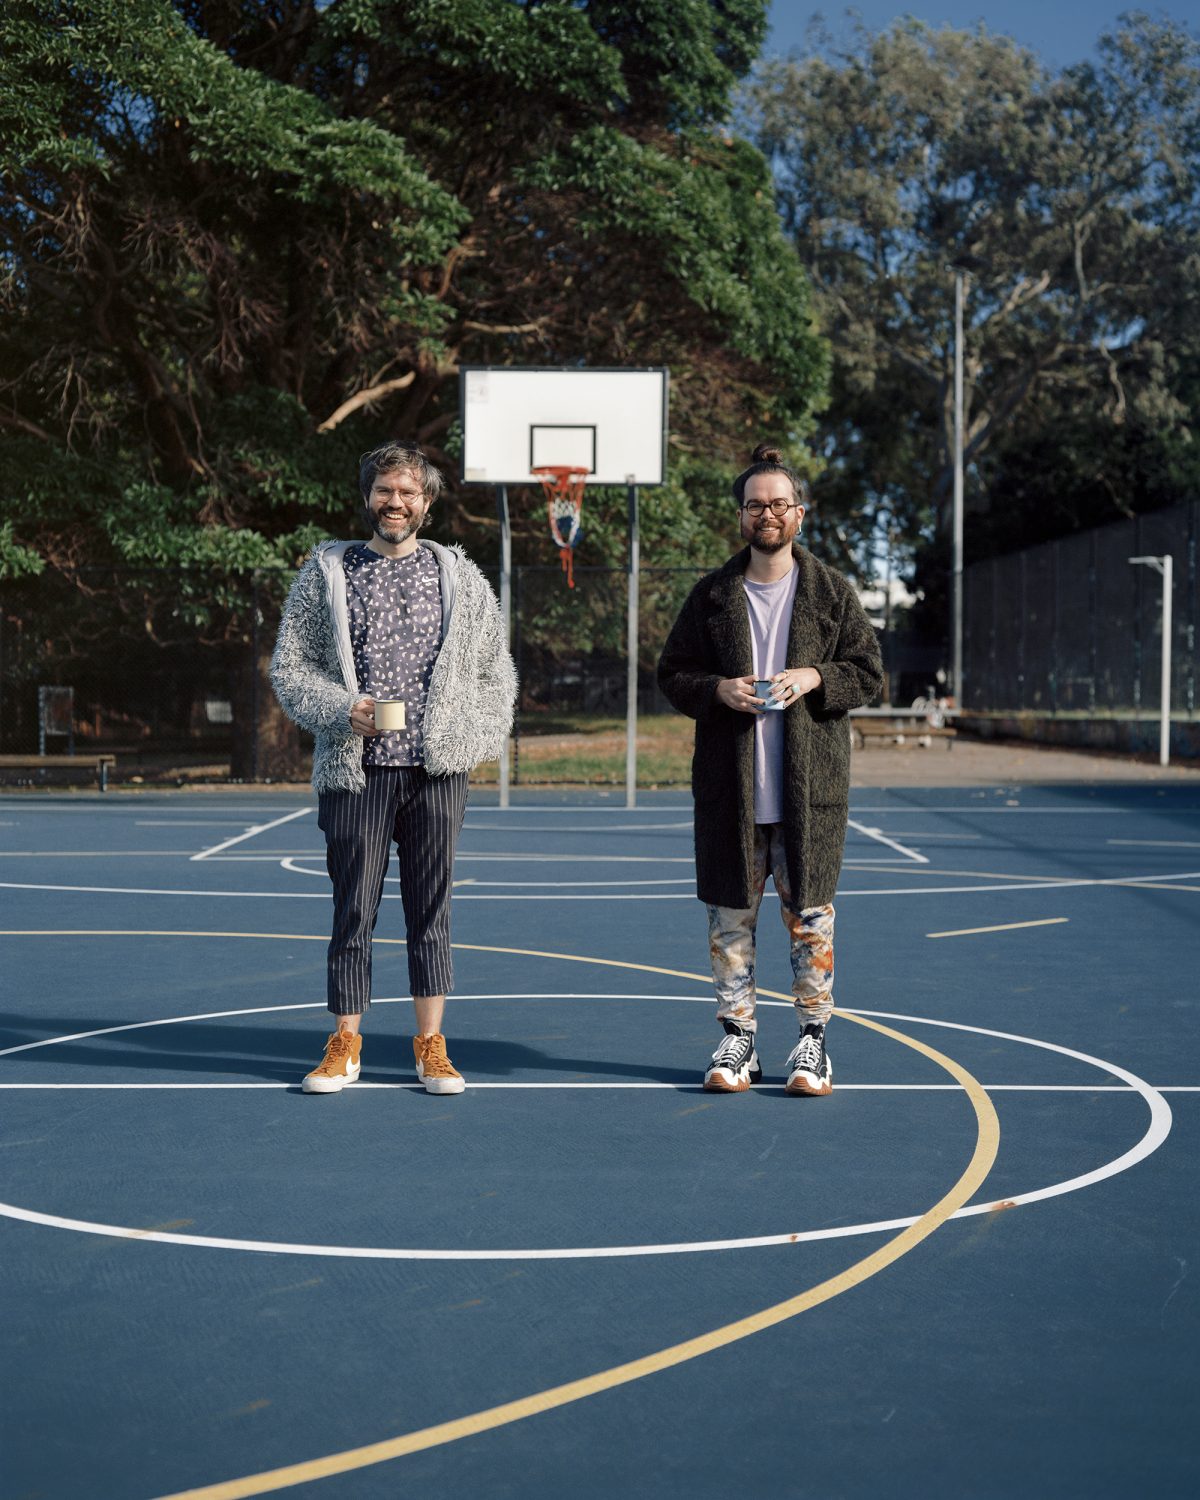 Two people smiling on a basketball court holding mugs of coffee. Taken by Liz Ham.